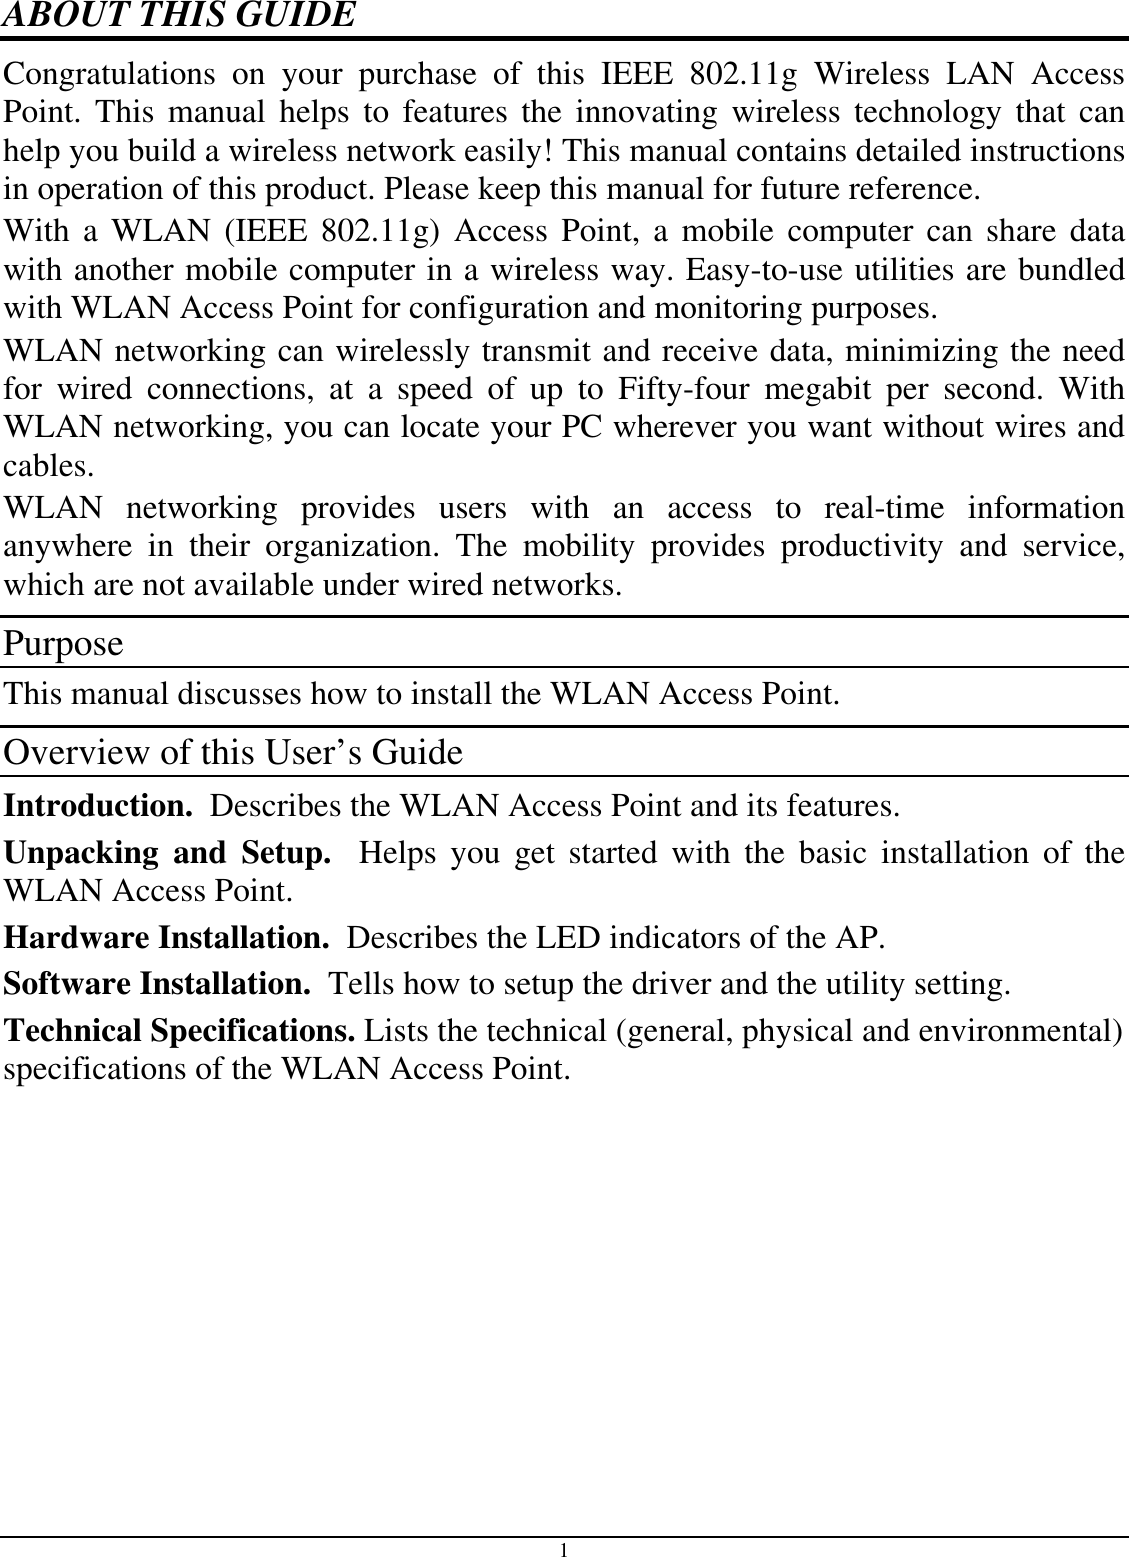 1 ABOUT THIS GUIDE Congratulations on your purchase of this IEEE 802.11g Wireless LAN Access Point. This manual helps to features the innovating wireless technology that can help you build a wireless network easily! This manual contains detailed instructions in operation of this product. Please keep this manual for future reference. With a WLAN (IEEE 802.11g) Access Point, a mobile computer can share data with another mobile computer in a wireless way. Easy-to-use utilities are bundled with WLAN Access Point for configuration and monitoring purposes.  WLAN networking can wirelessly transmit and receive data, minimizing the need for wired connections, at a speed of up to Fifty-four megabit per second. With WLAN networking, you can locate your PC wherever you want without wires and cables. WLAN networking provides users with an access to real-time information anywhere in their organization. The mobility provides productivity and service, which are not available under wired networks.  Purpose This manual discusses how to install the WLAN Access Point.  Overview of this User’s Guide Introduction.  Describes the WLAN Access Point and its features. Unpacking and Setup.  Helps you get started with the basic installation of the WLAN Access Point. Hardware Installation.  Describes the LED indicators of the AP. Software Installation.  Tells how to setup the driver and the utility setting. Technical Specifications. Lists the technical (general, physical and environmental) specifications of the WLAN Access Point.